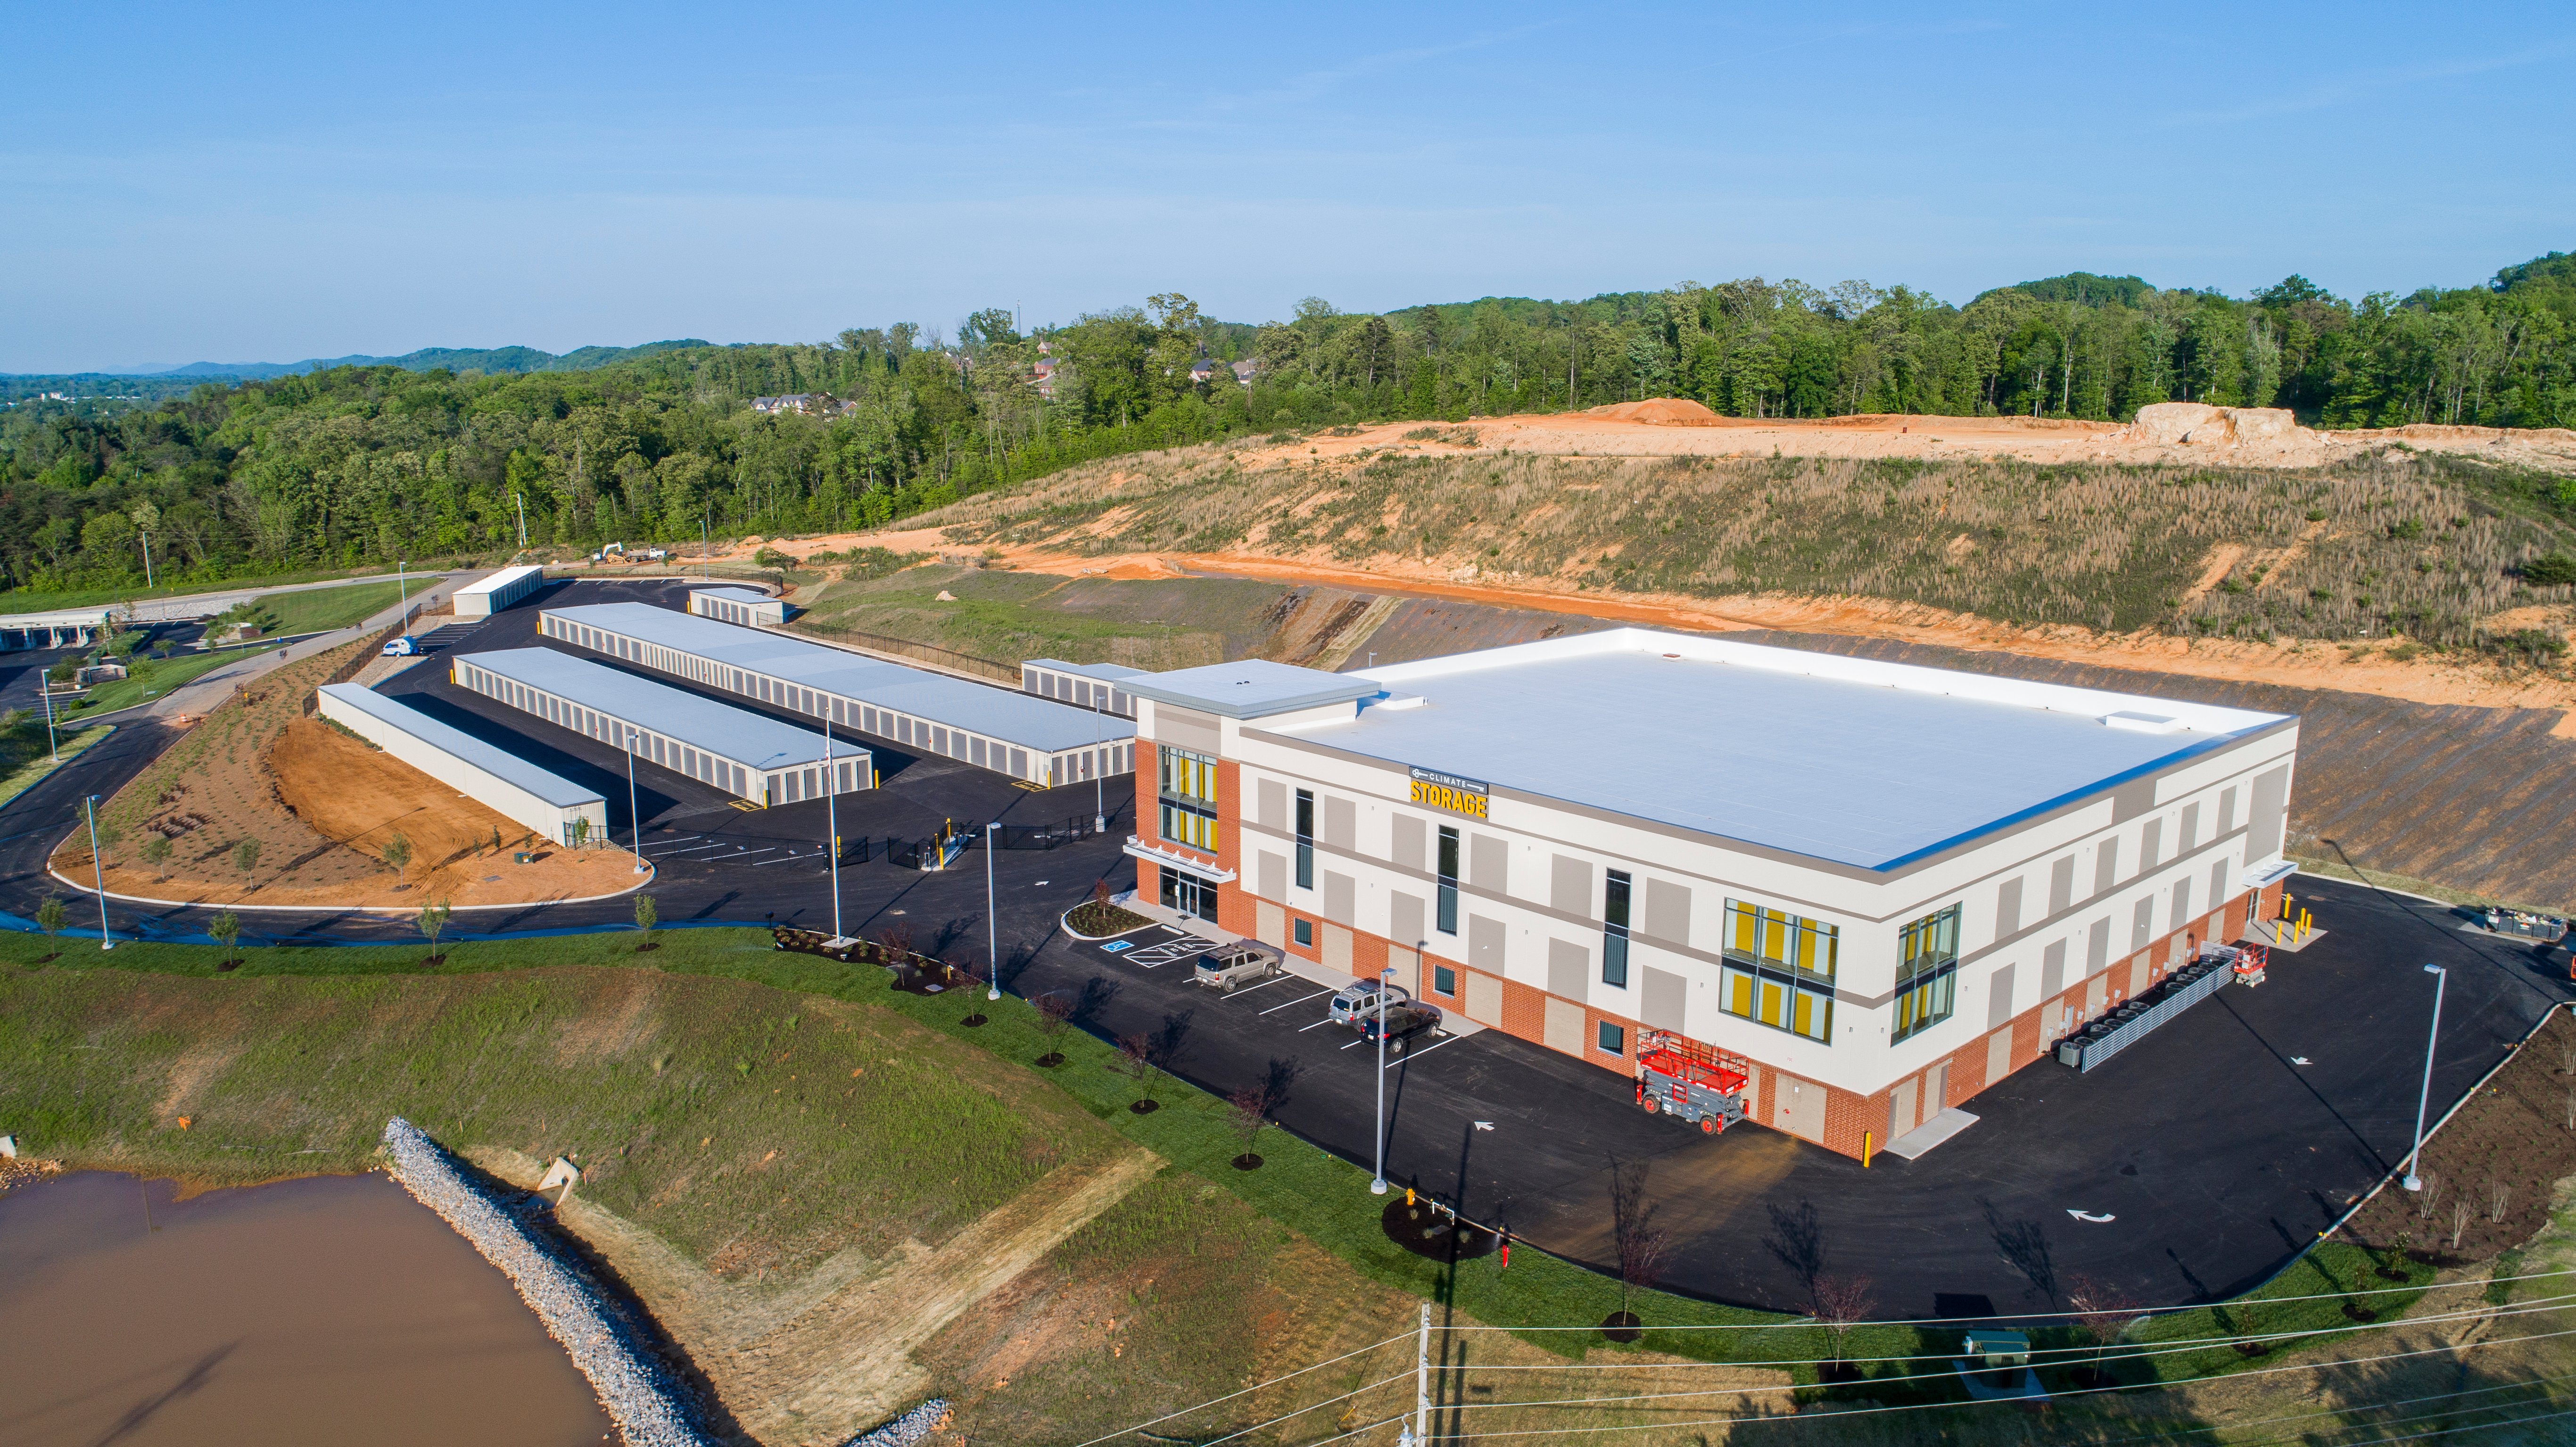 A multi story self storage facility in Pellissipi, Tennessee built by Climate Storage and BETCO